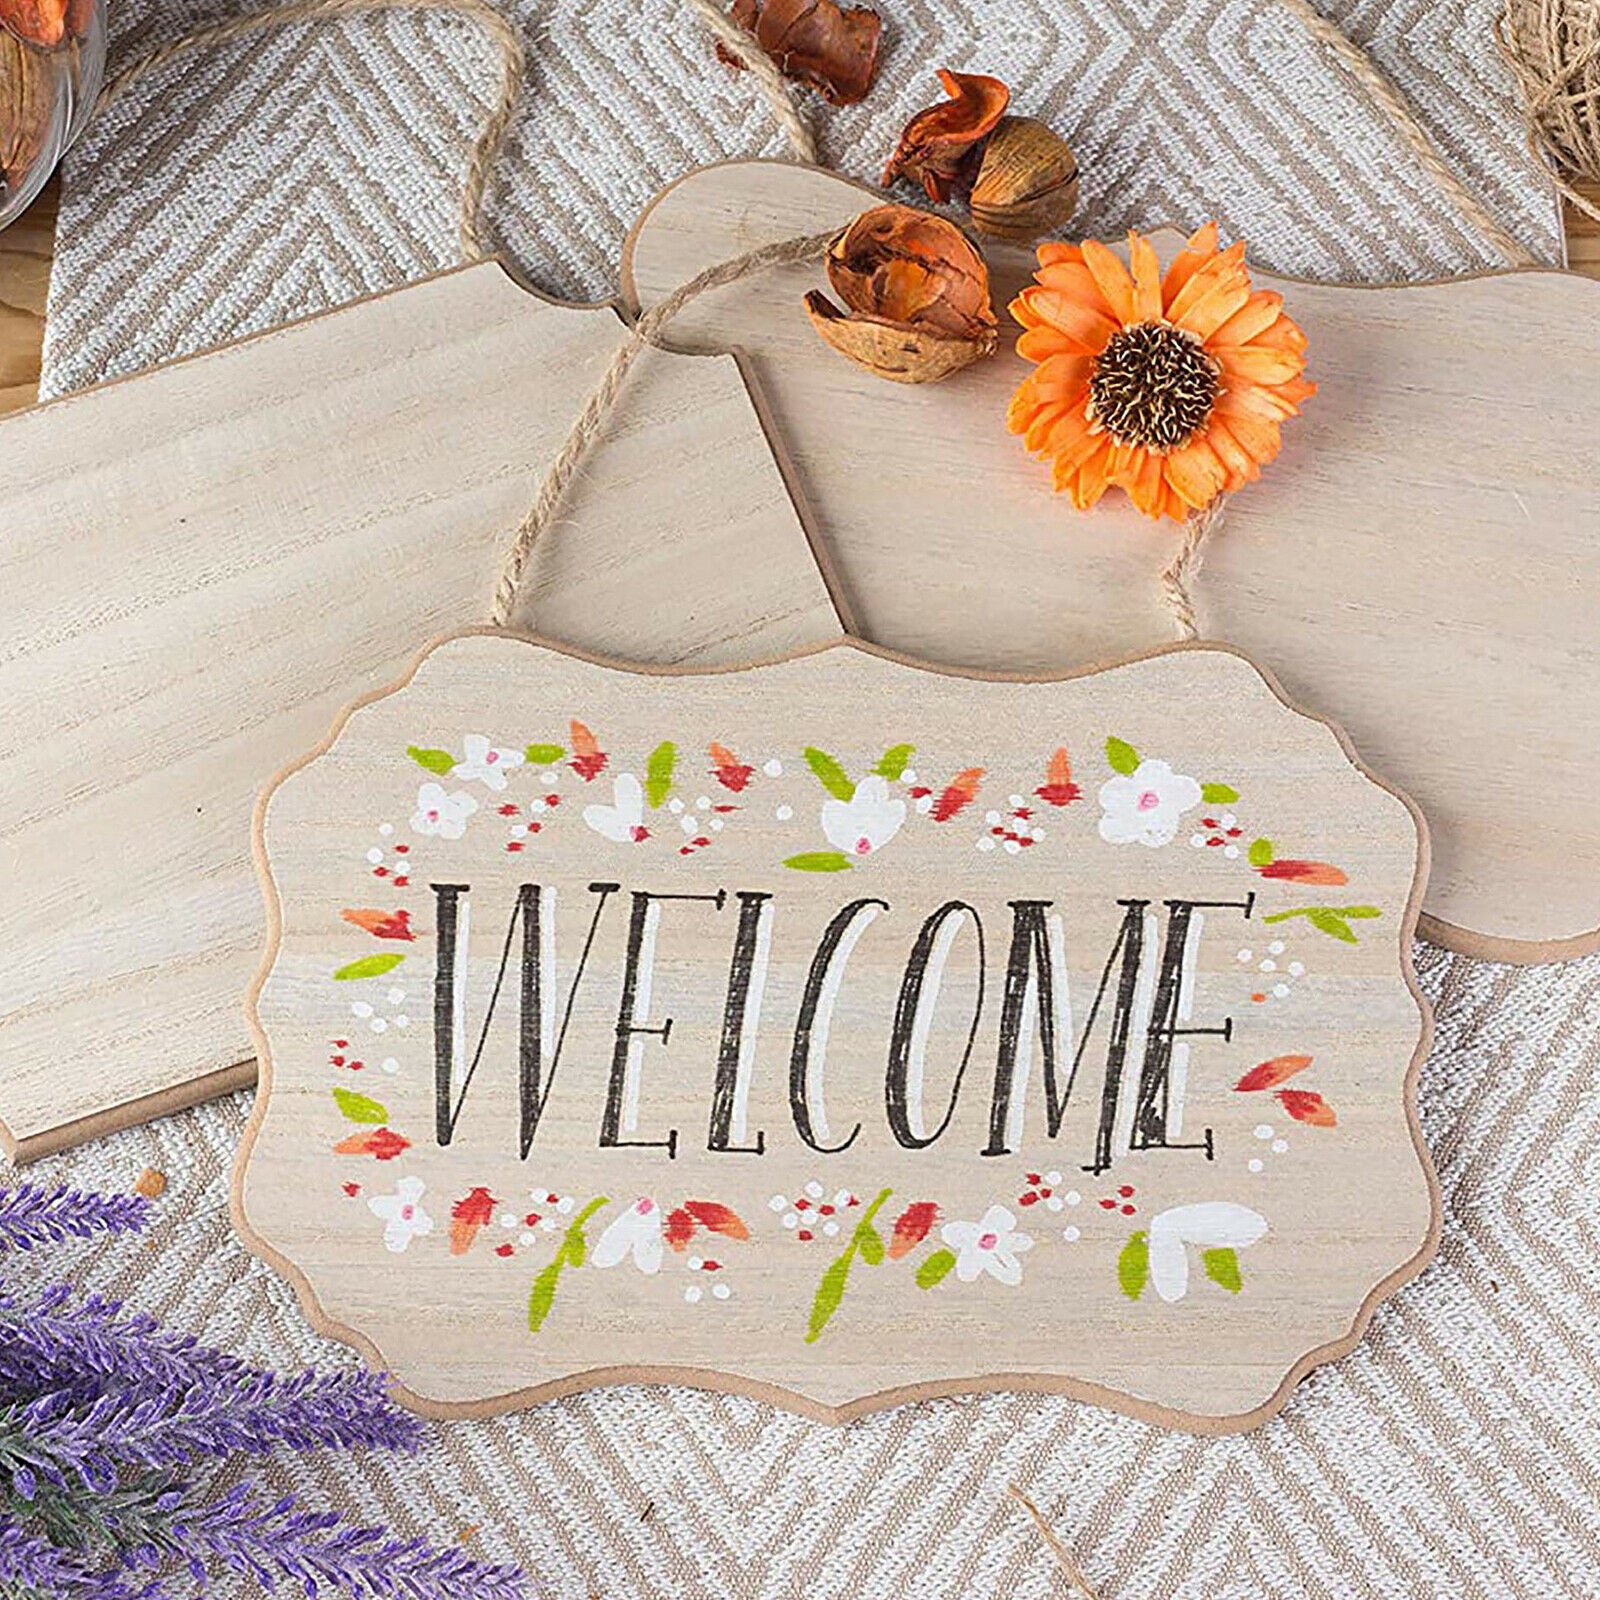 3 Pieces Nature White Wood Plaque for Hanging Sign DIY Wooden